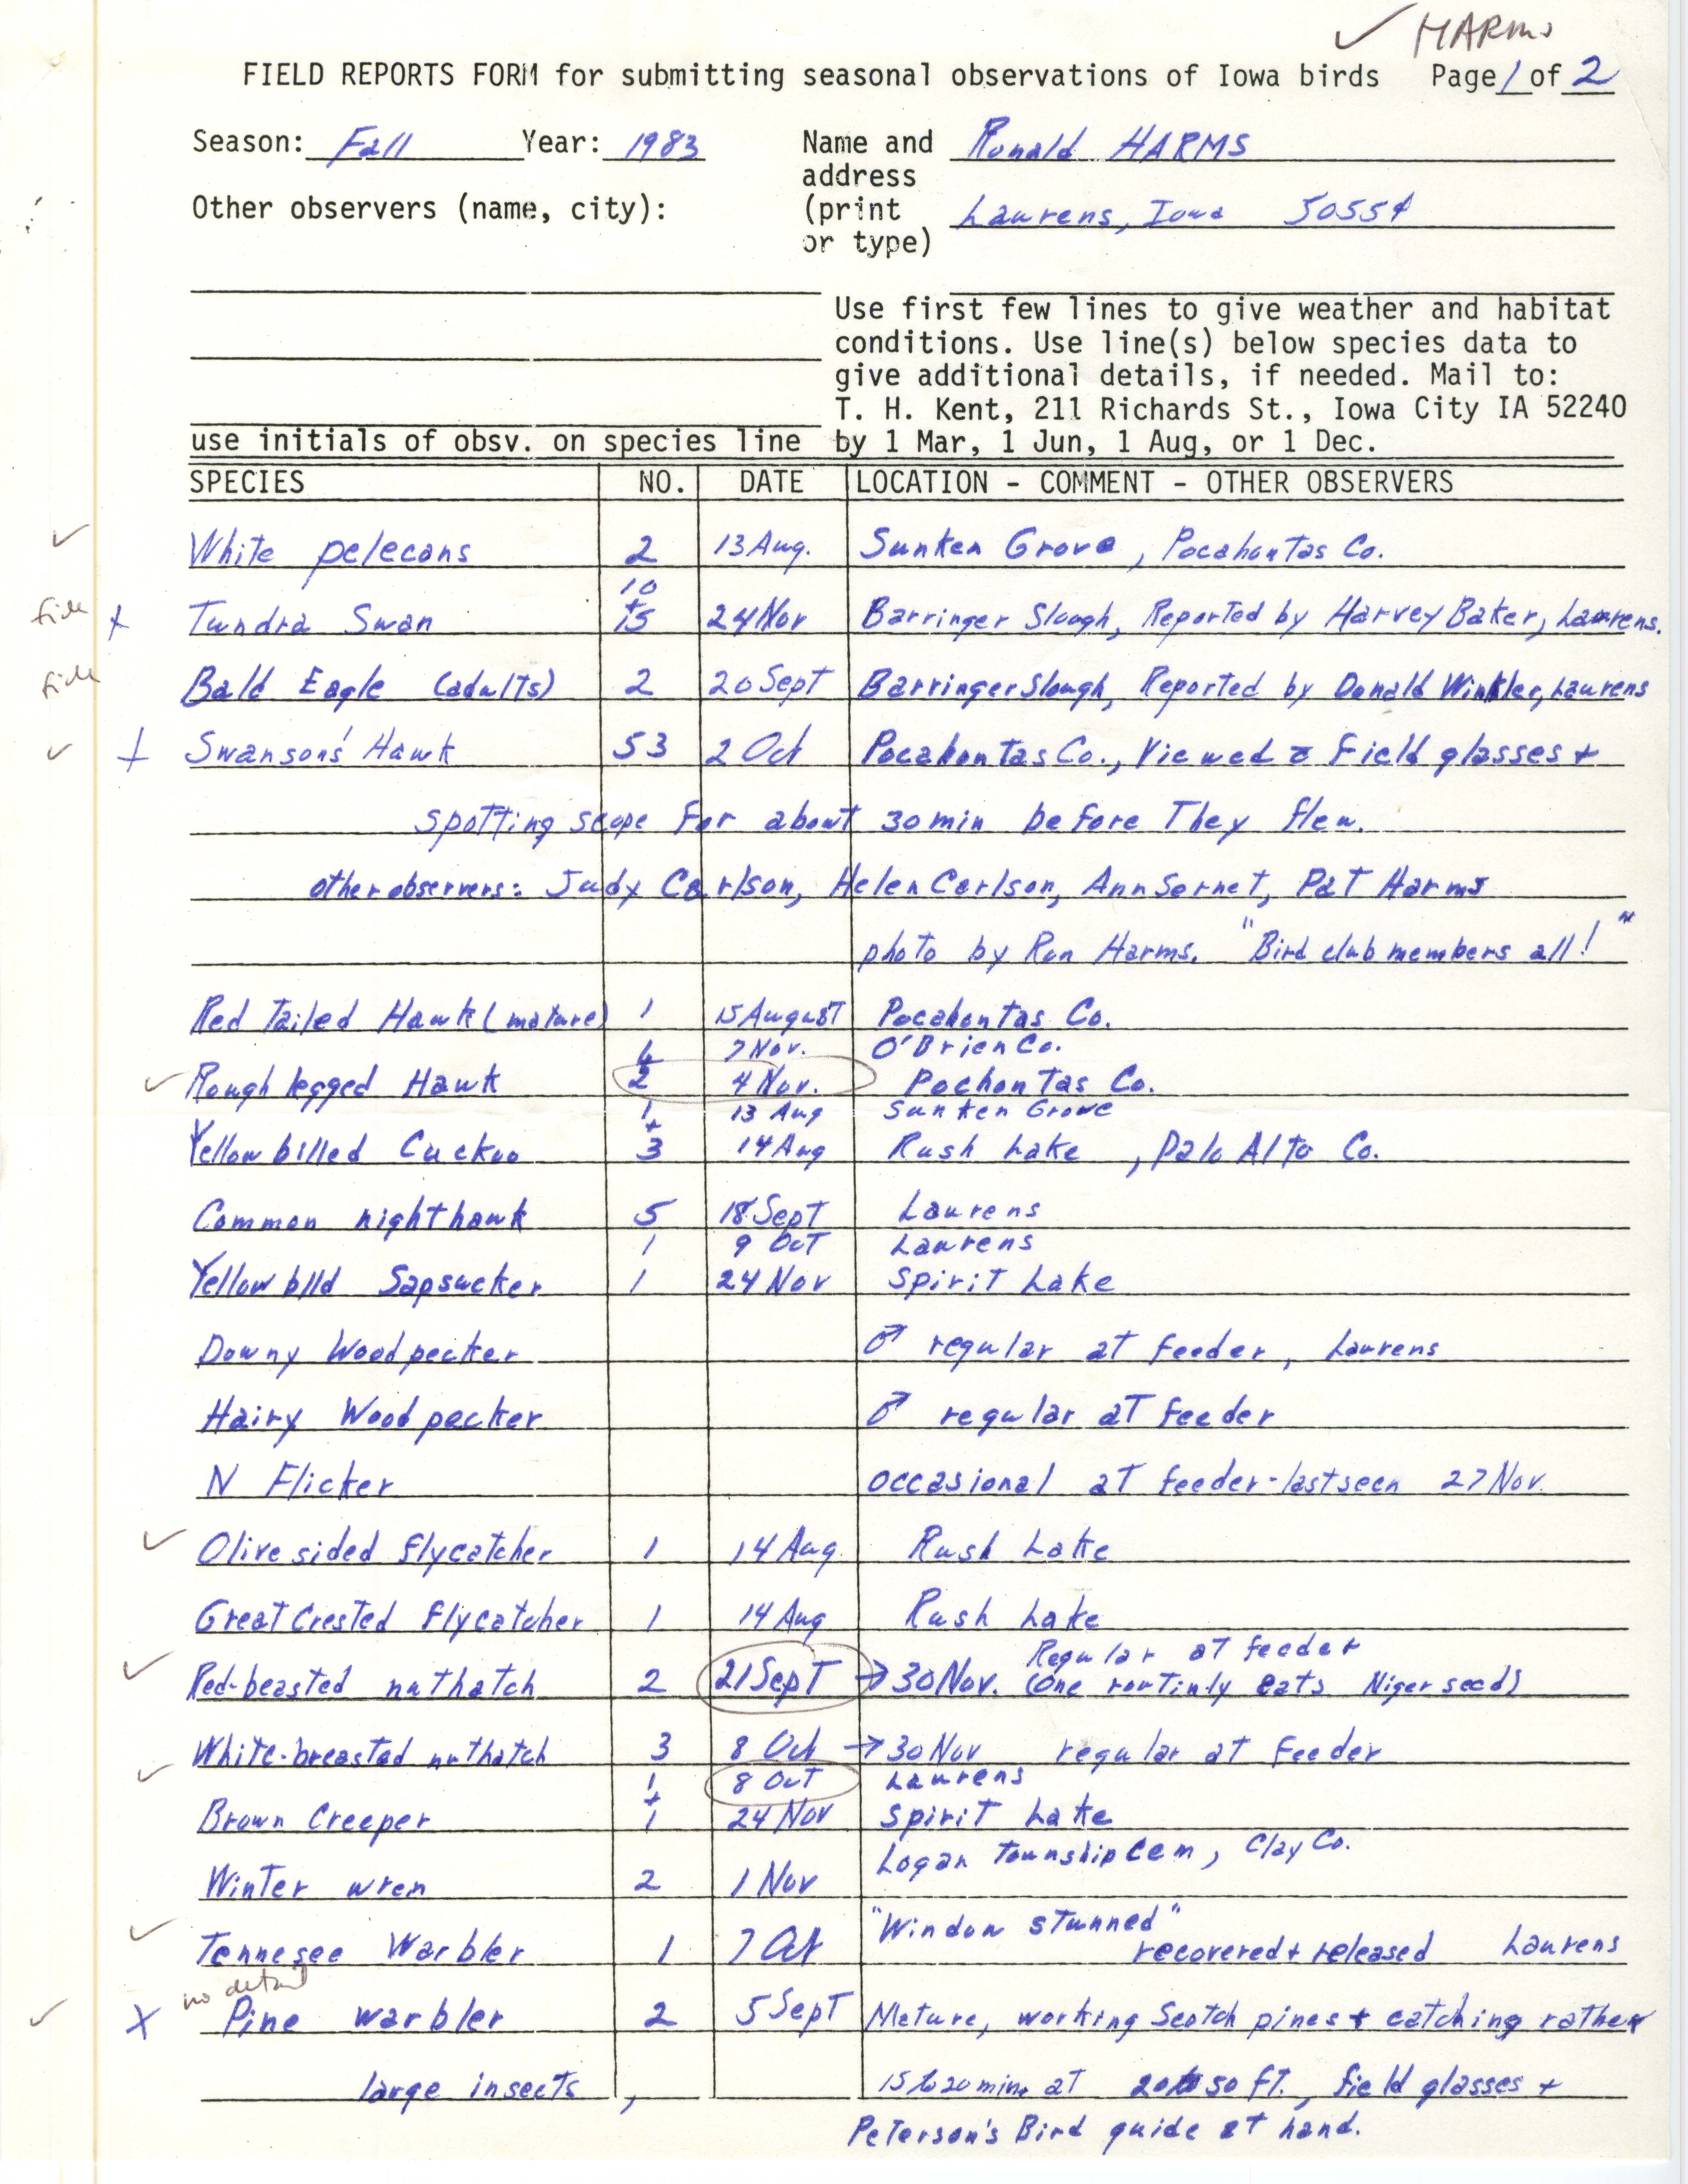 Field reports form for submitting seasonal observations of Iowa birds, Ronald Harms, fall 1983